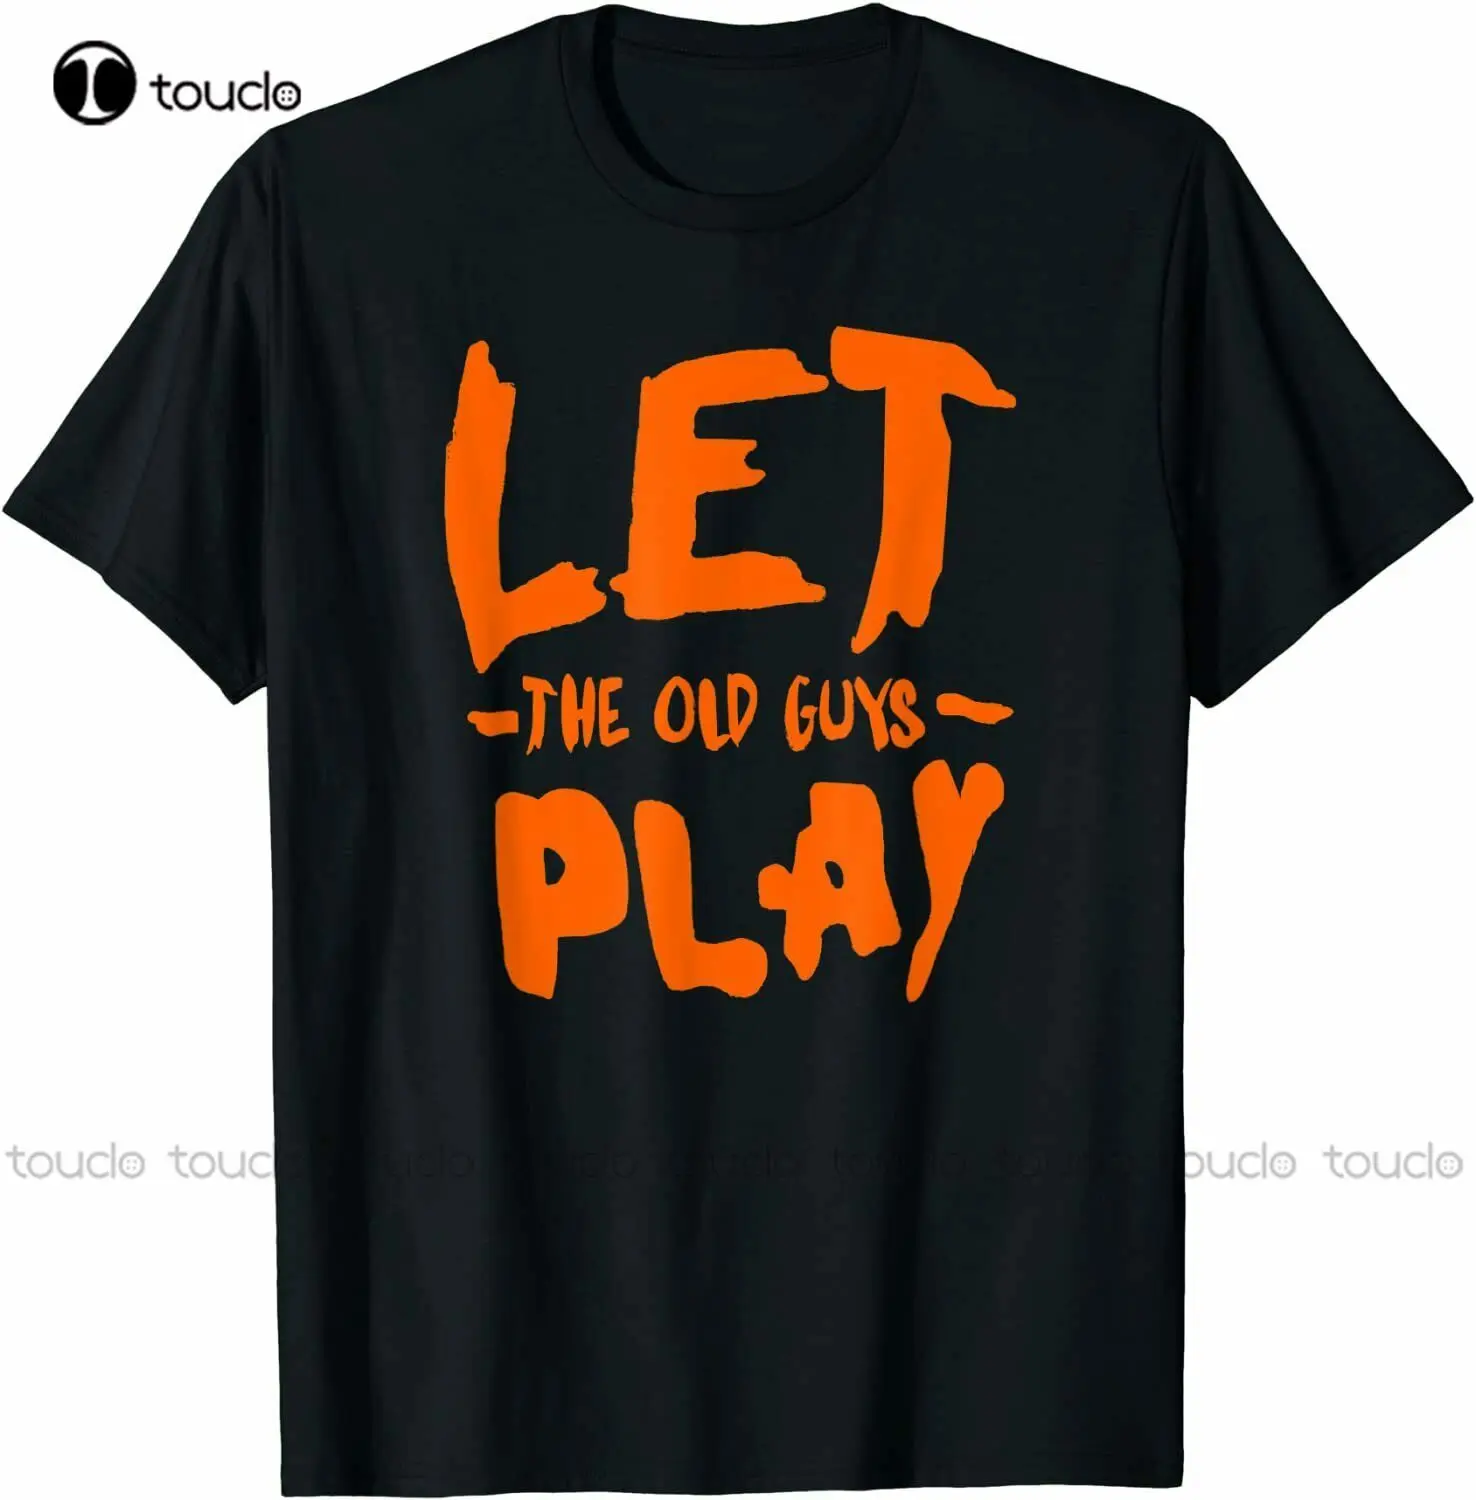 

New Let The Old Guys Play Brandon Crawford Gi Funny T-Shirt Womens T Shirts Cotton Tee S-5Xl Unisex